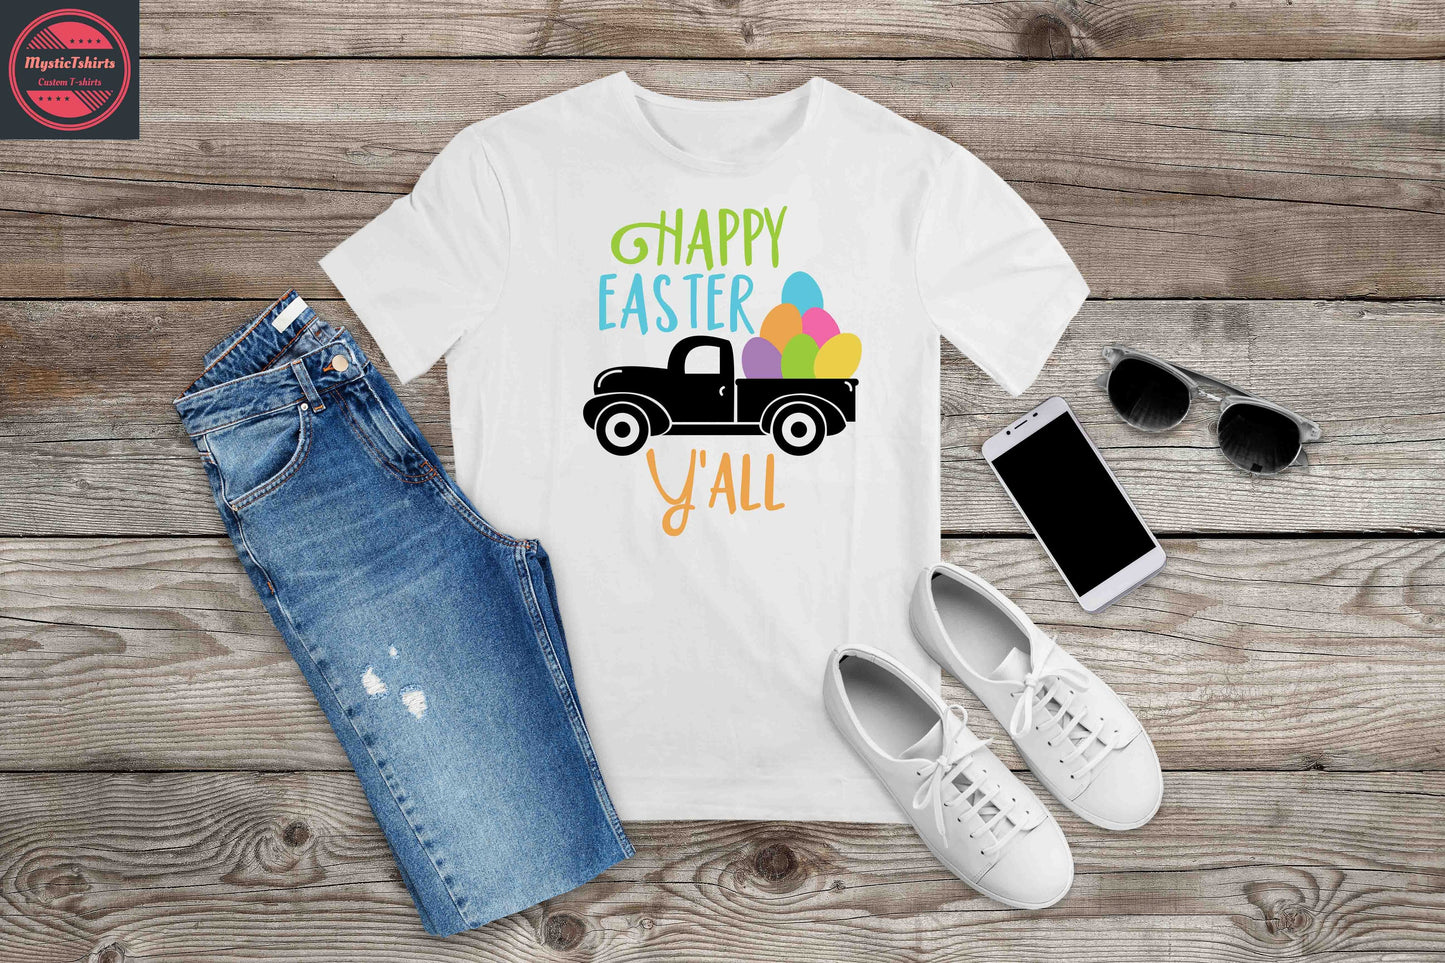 181. HAPPY EASTER Y'ALL, Custom Made Shirt, Personalized T-Shirt,